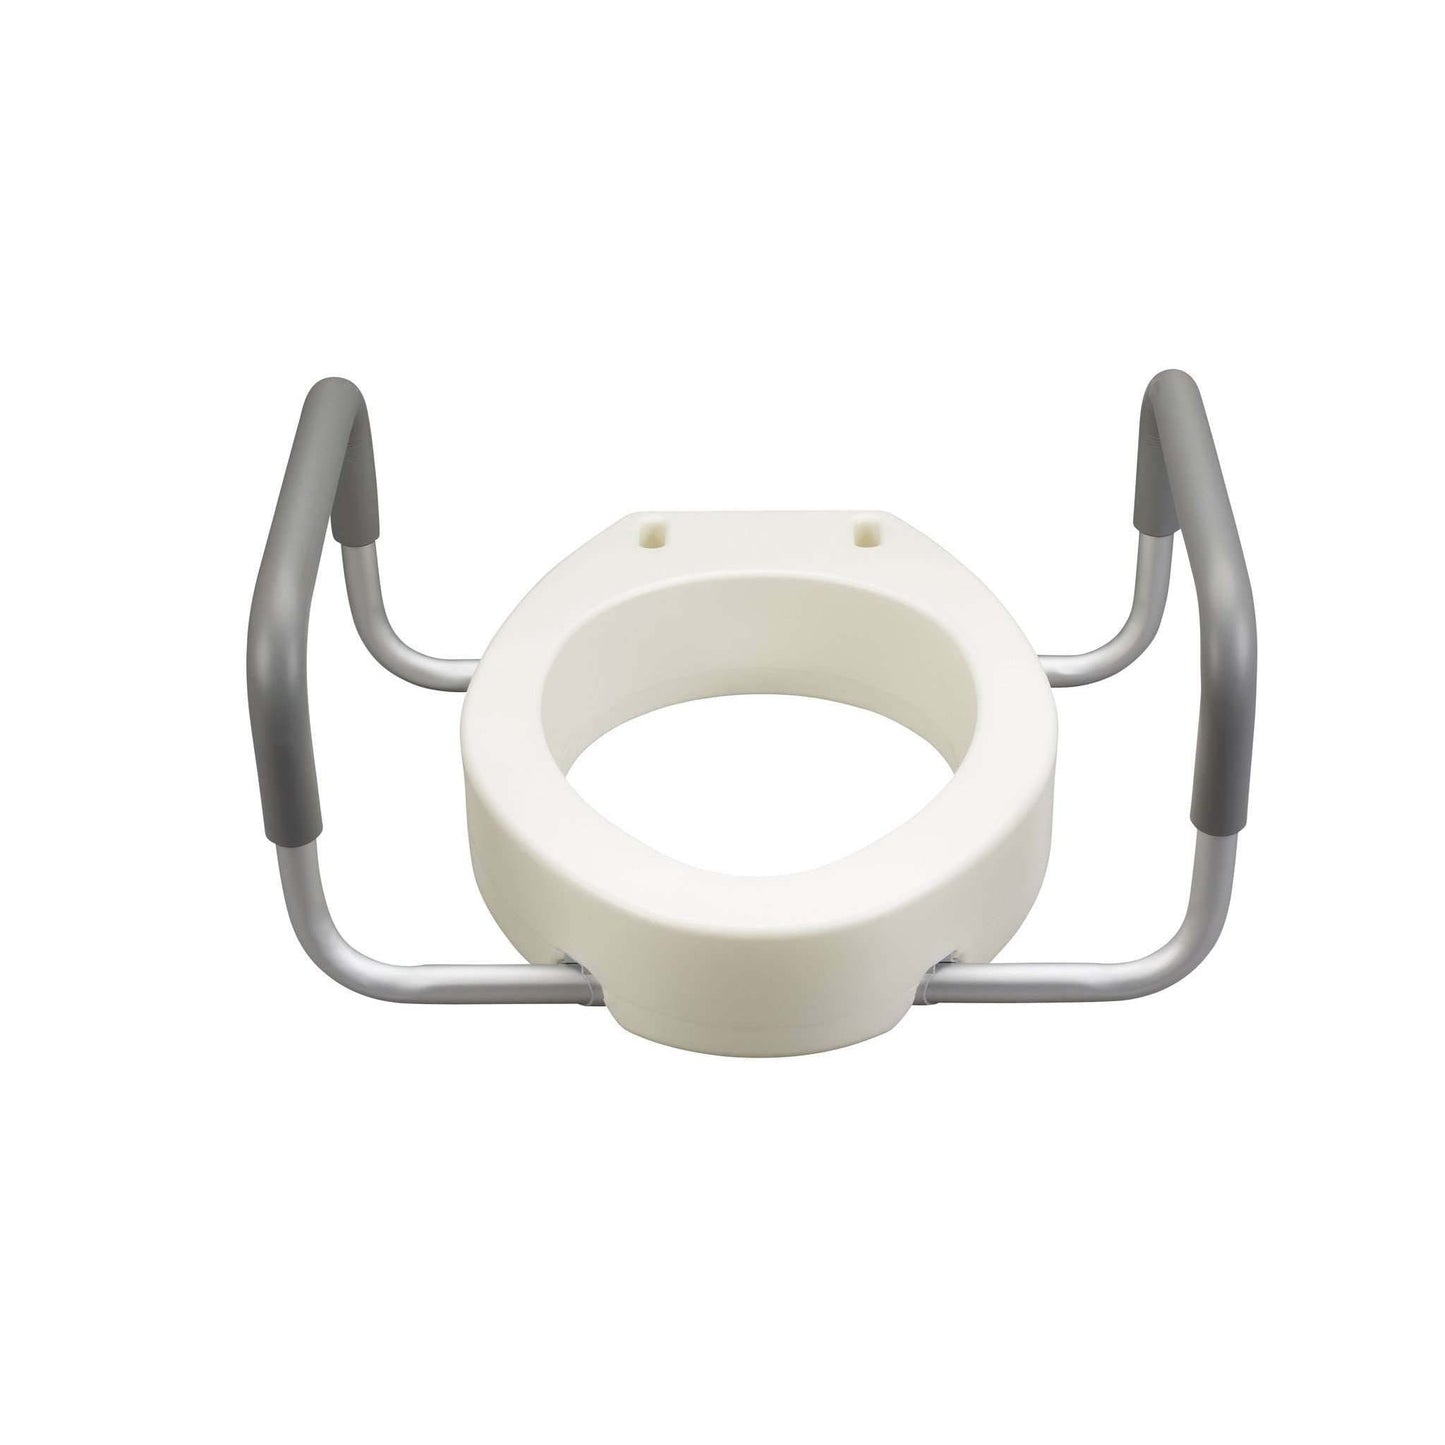 Drive 12403 Premium Toilet Seat Riser with Removable Arms, Elongated Seat